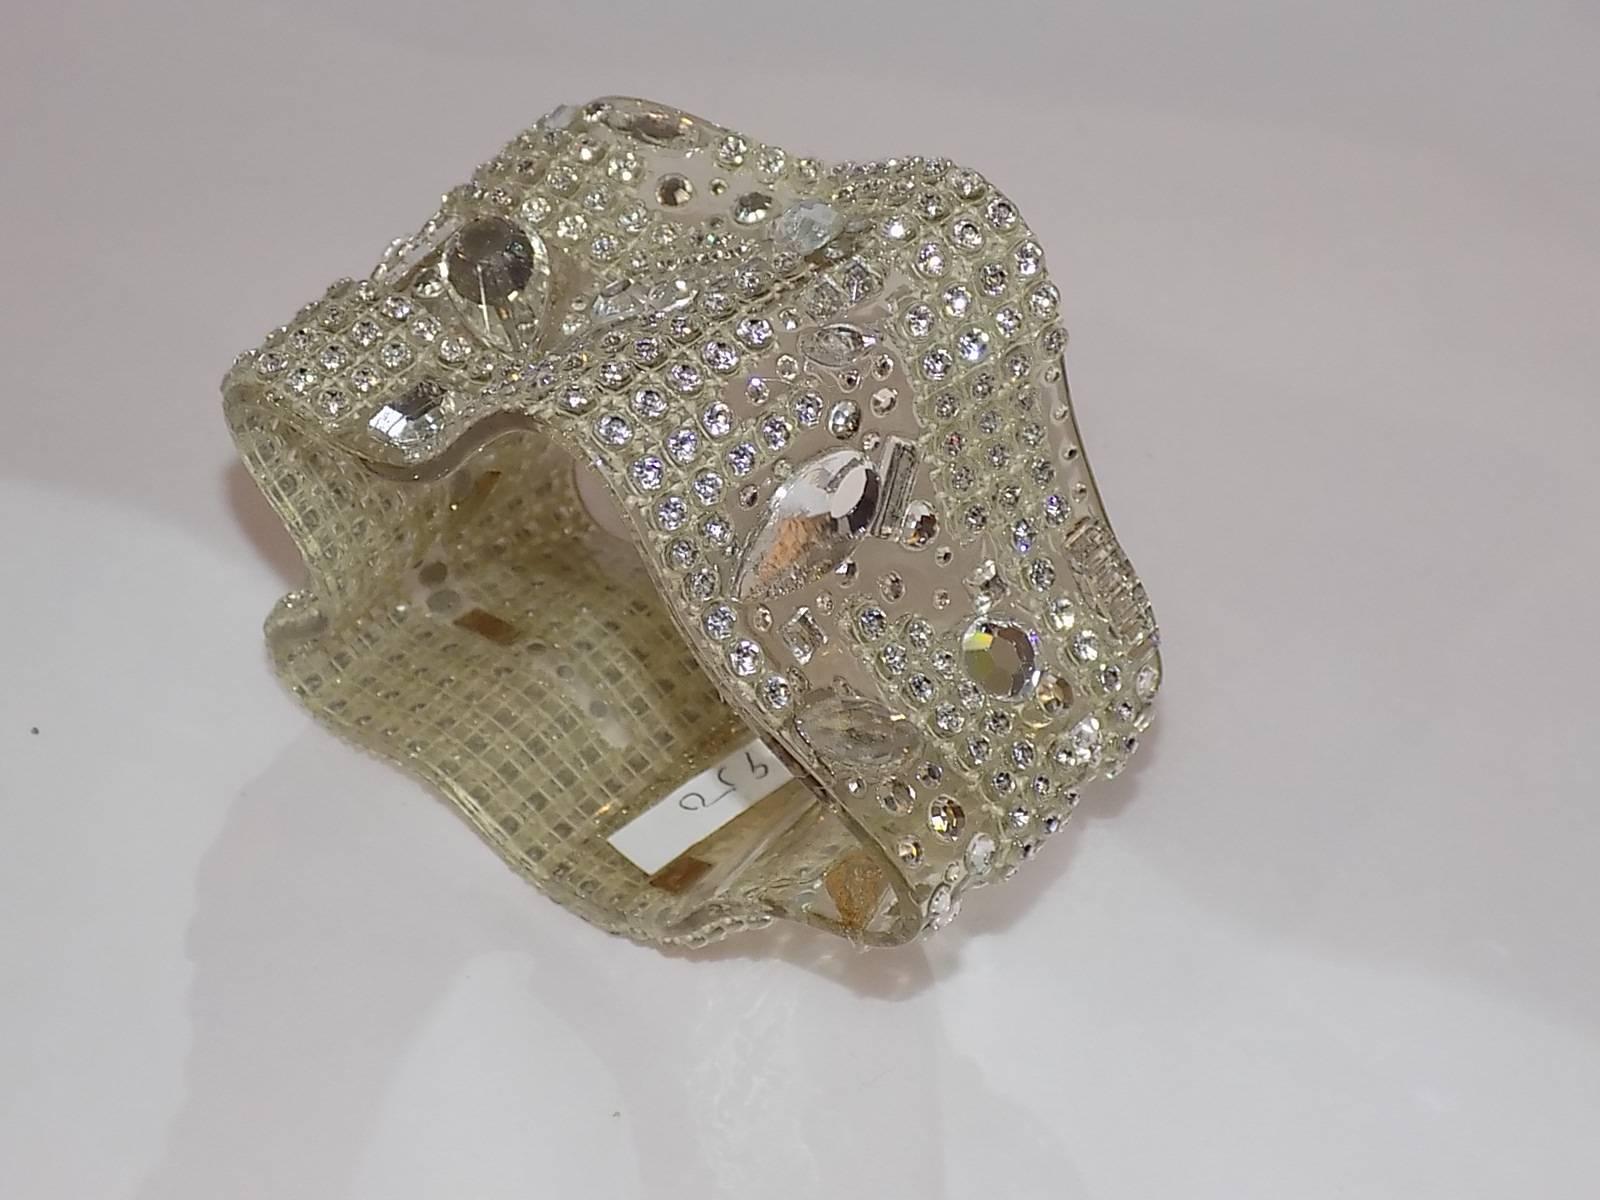 Wide  clear cuff Ribbon  bracelet created 1988 called "Citi Lights" Covered with antique and Swarovski crystals. 2.5" wide. Signed by artist and dated.